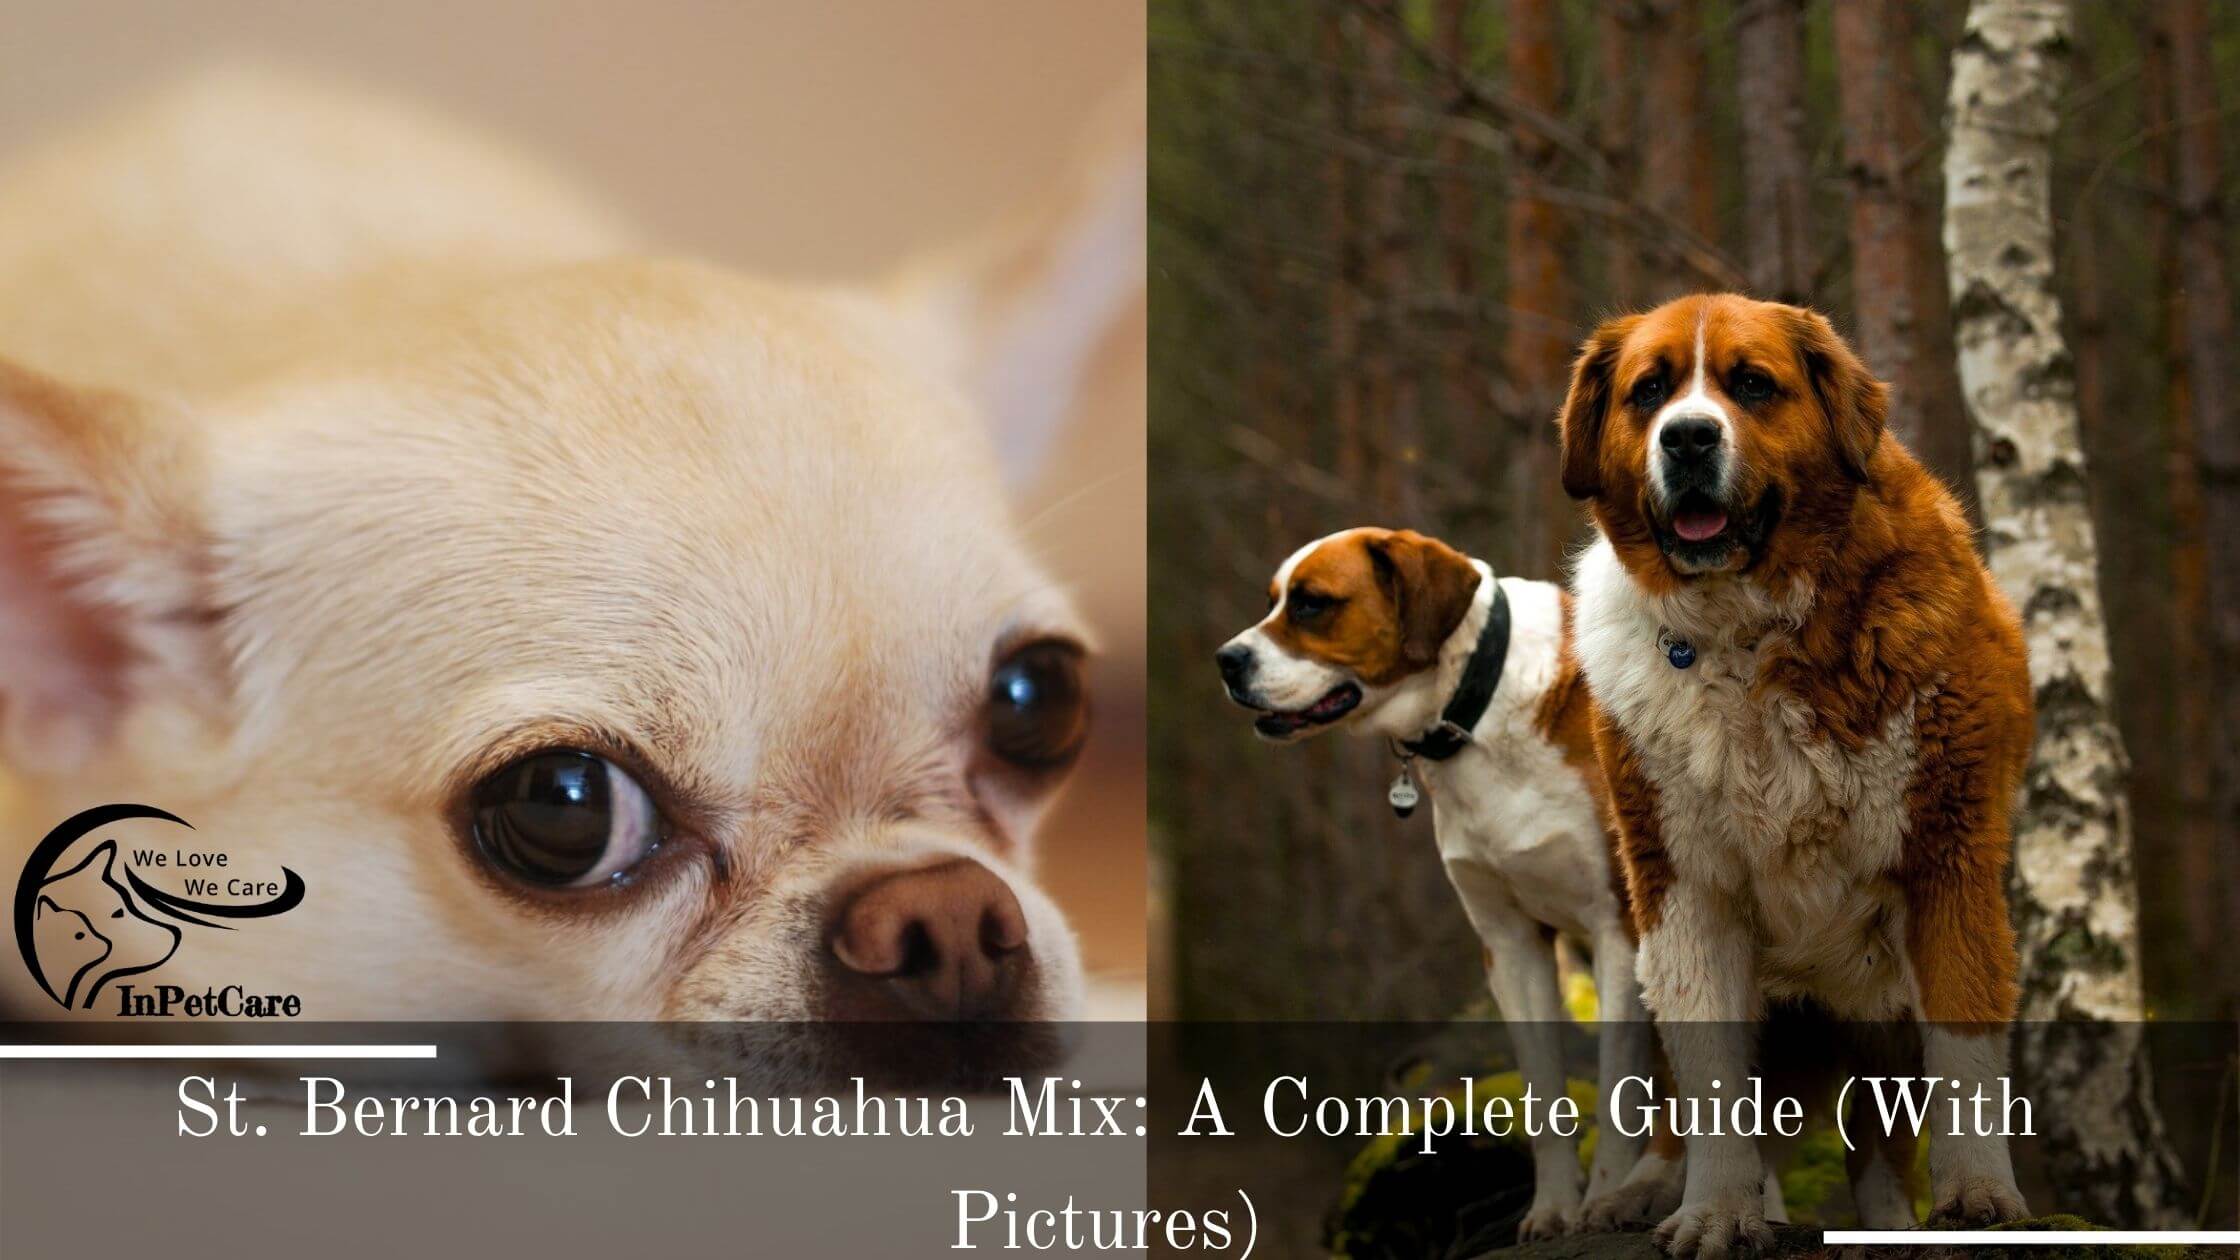 St. Bernard Chihuahua Mix: A Complete Guide (With Pictures)